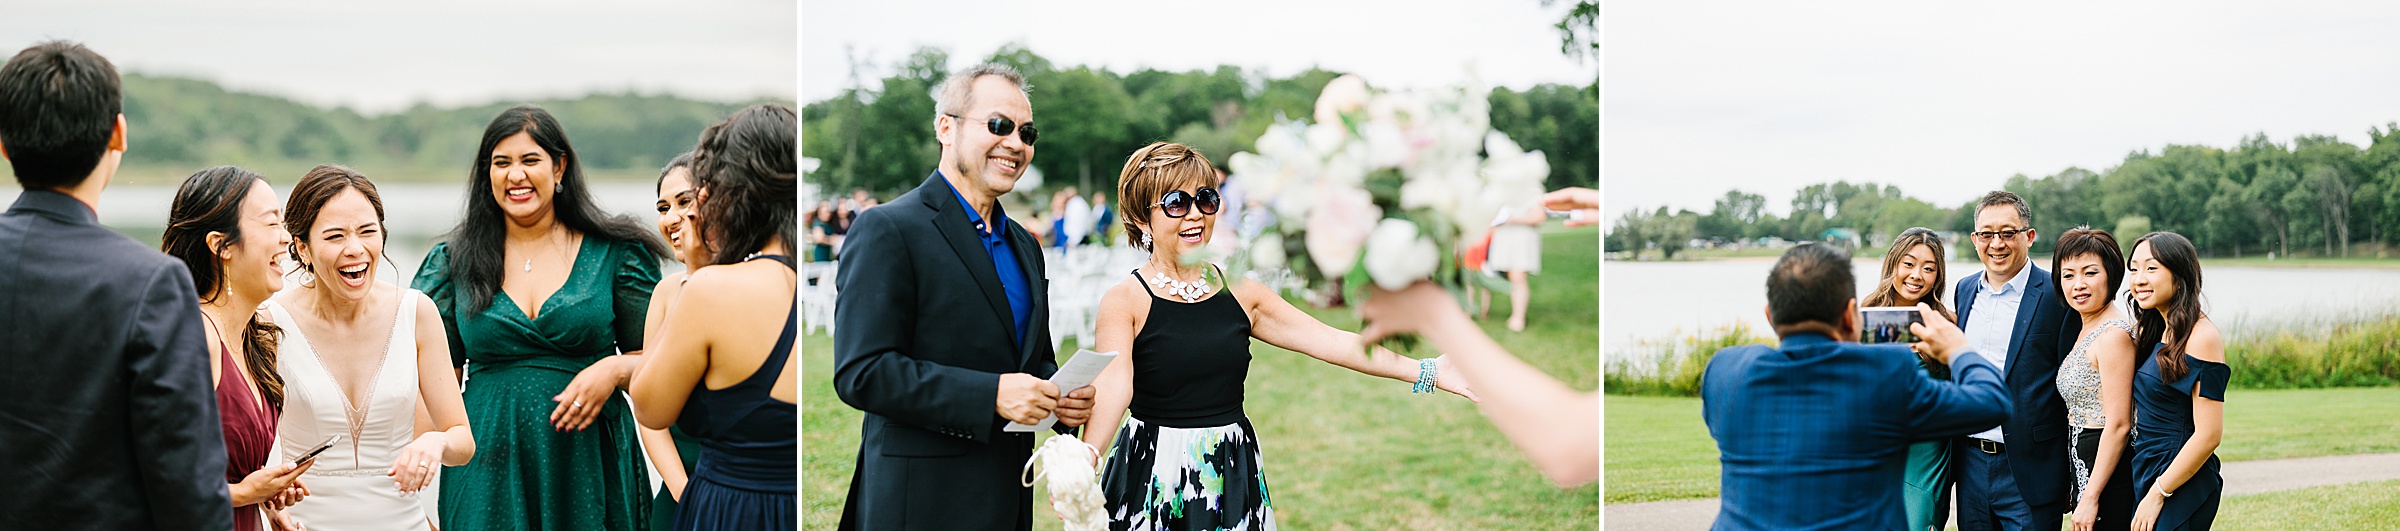 Bride is laughing with loved ones, guests smile and greet each other; guests take photos together during the Walenwoods summer wedding by Detroit Wedding Photographer Michele Maloney